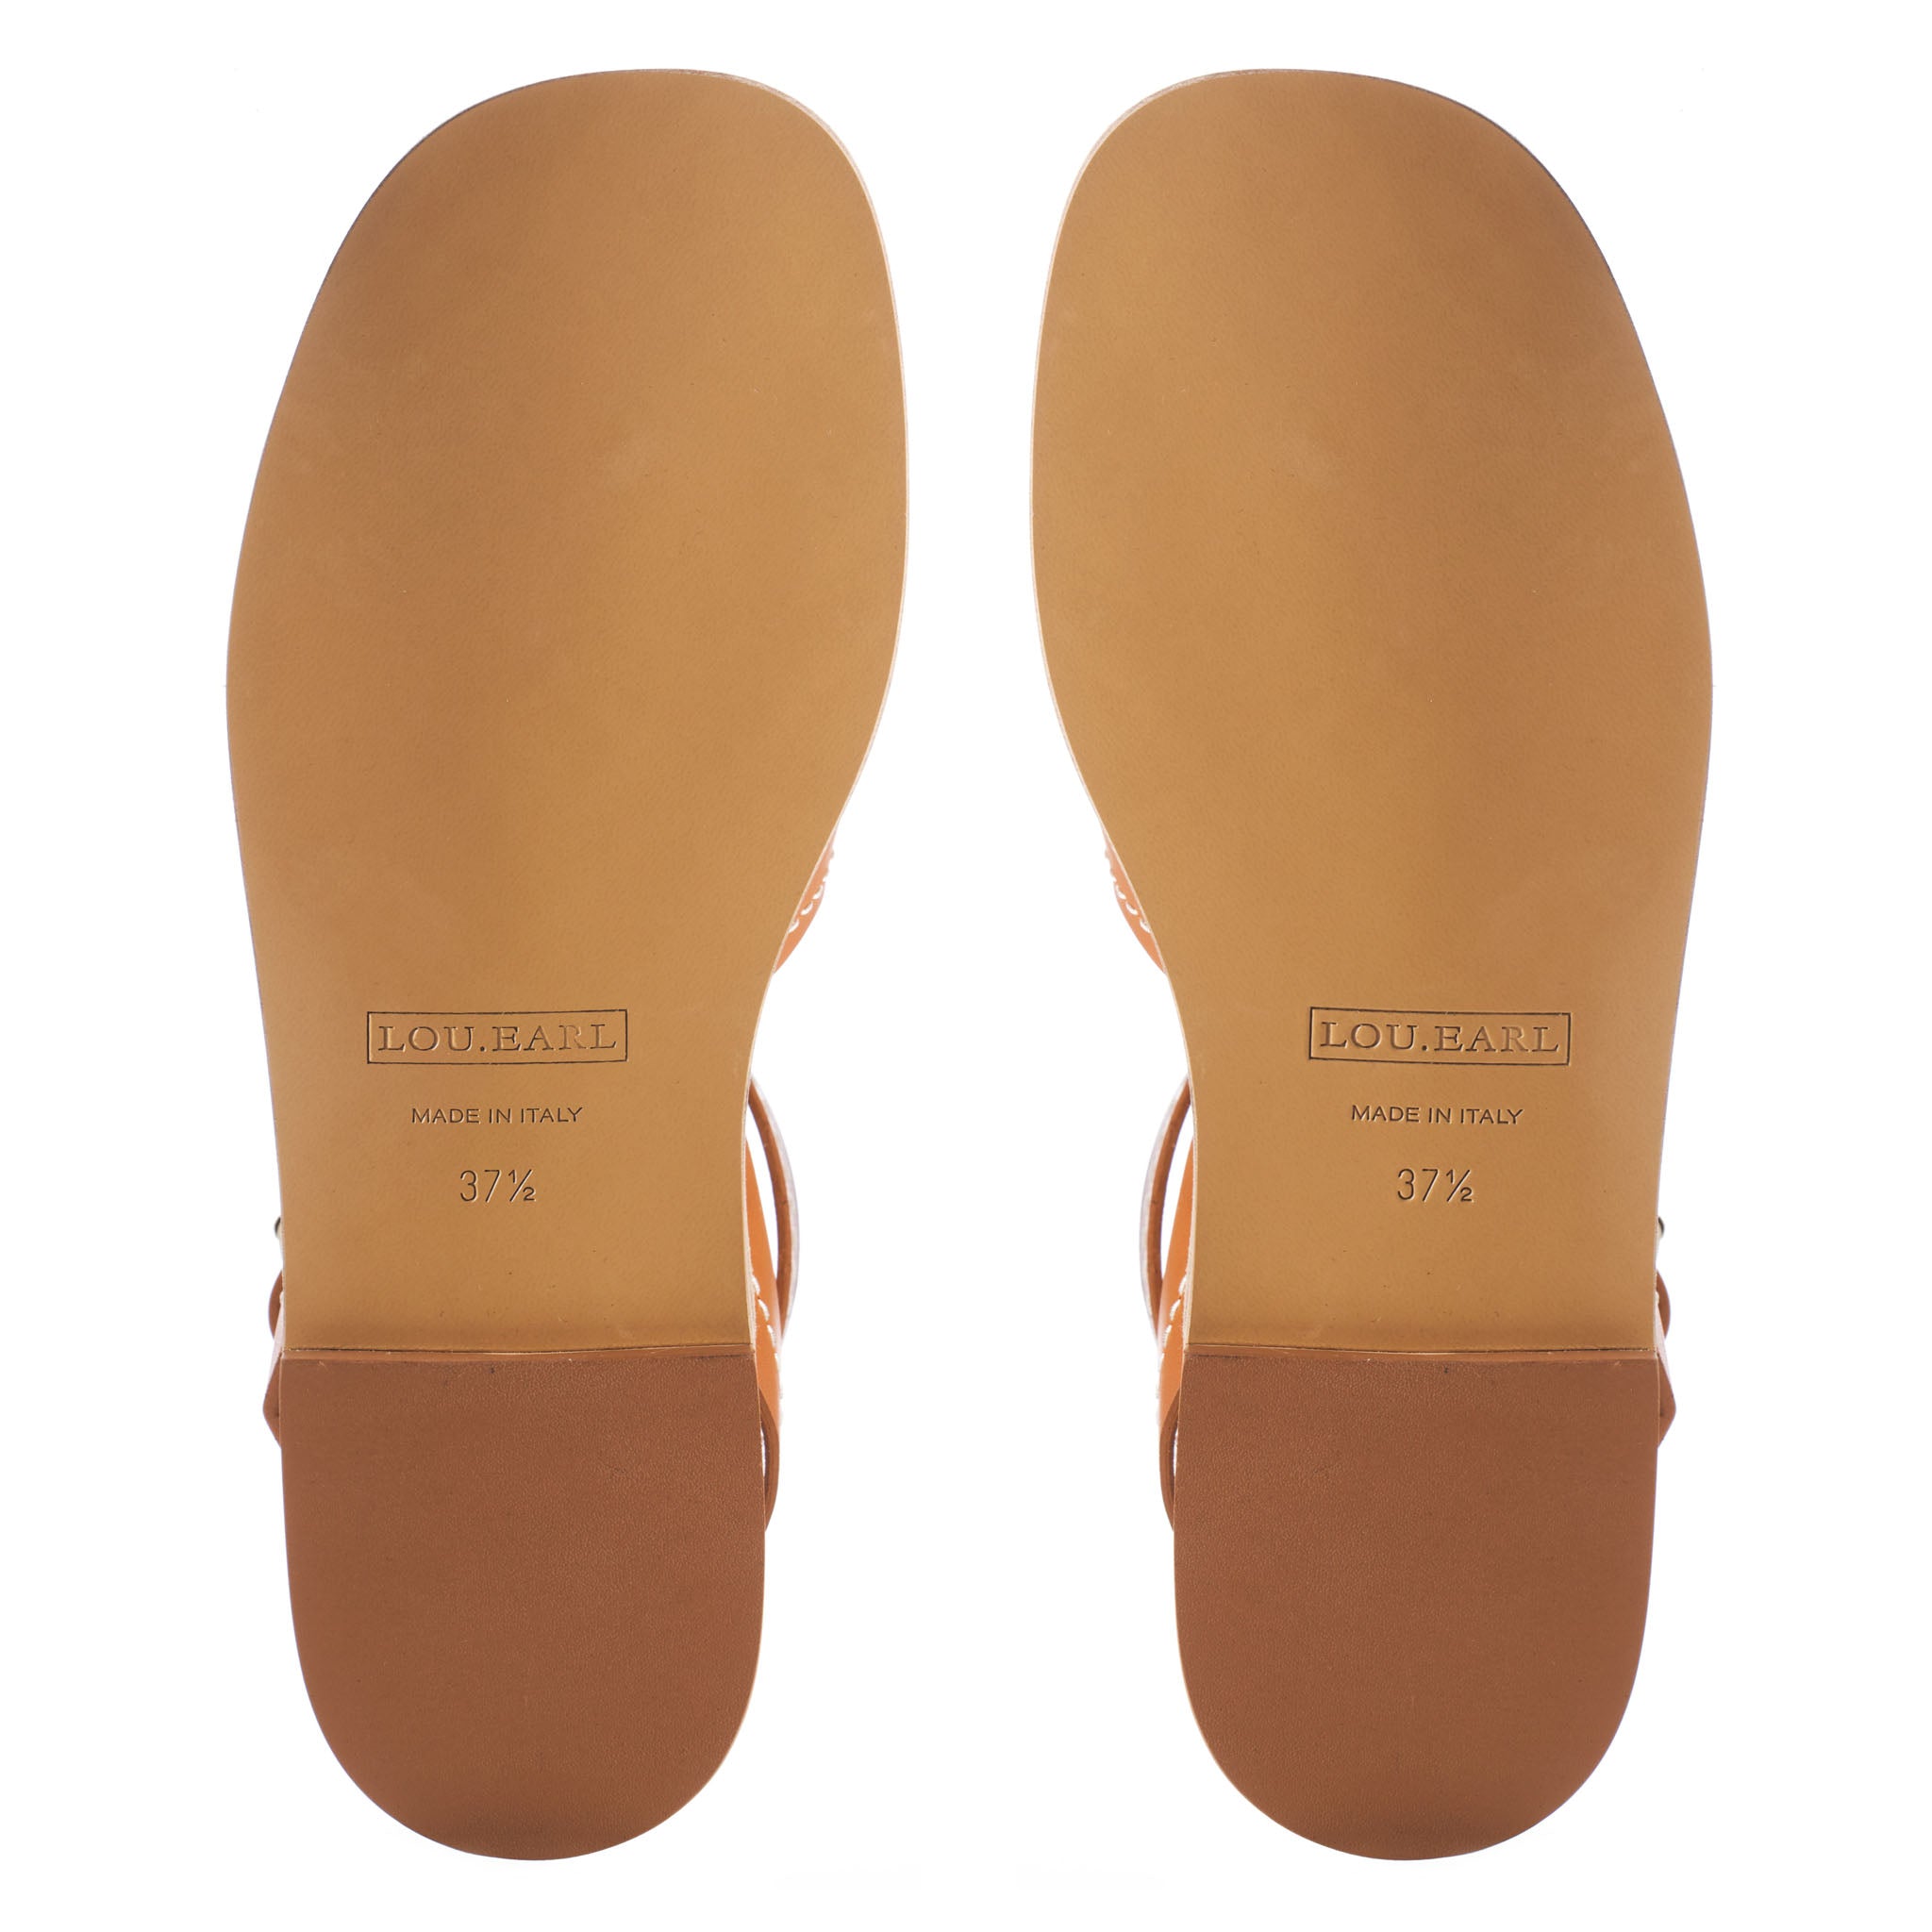 soft square toe flat sandals with leather outsole and upper